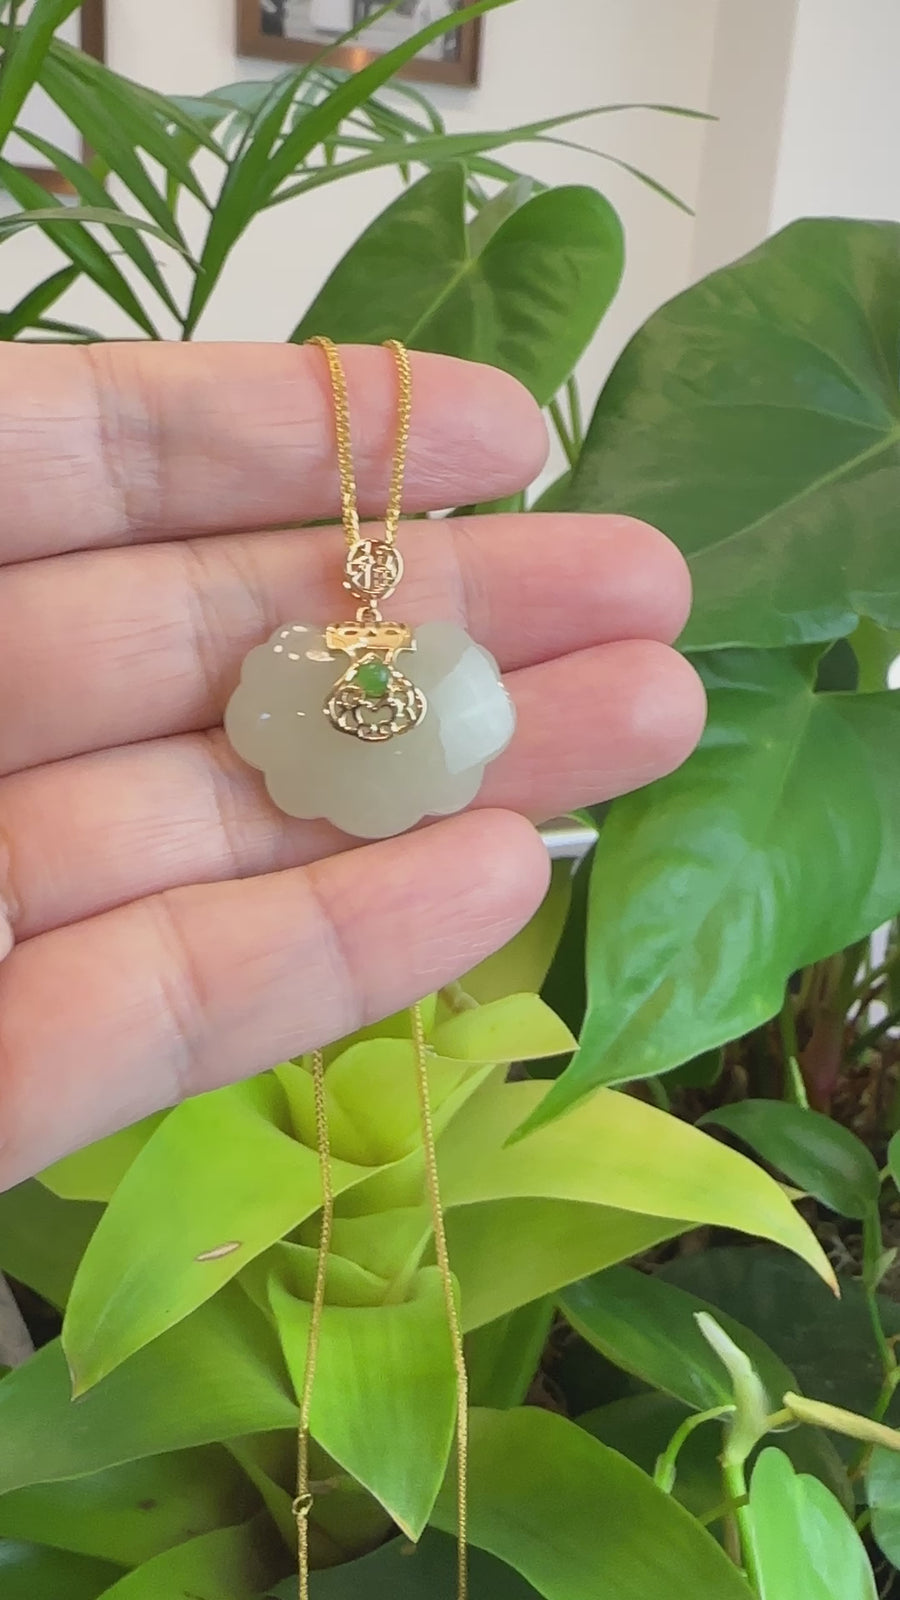 Genuine White Jade RuYi Pendant Necklace  with 14K Yellow Solid Gold Bail